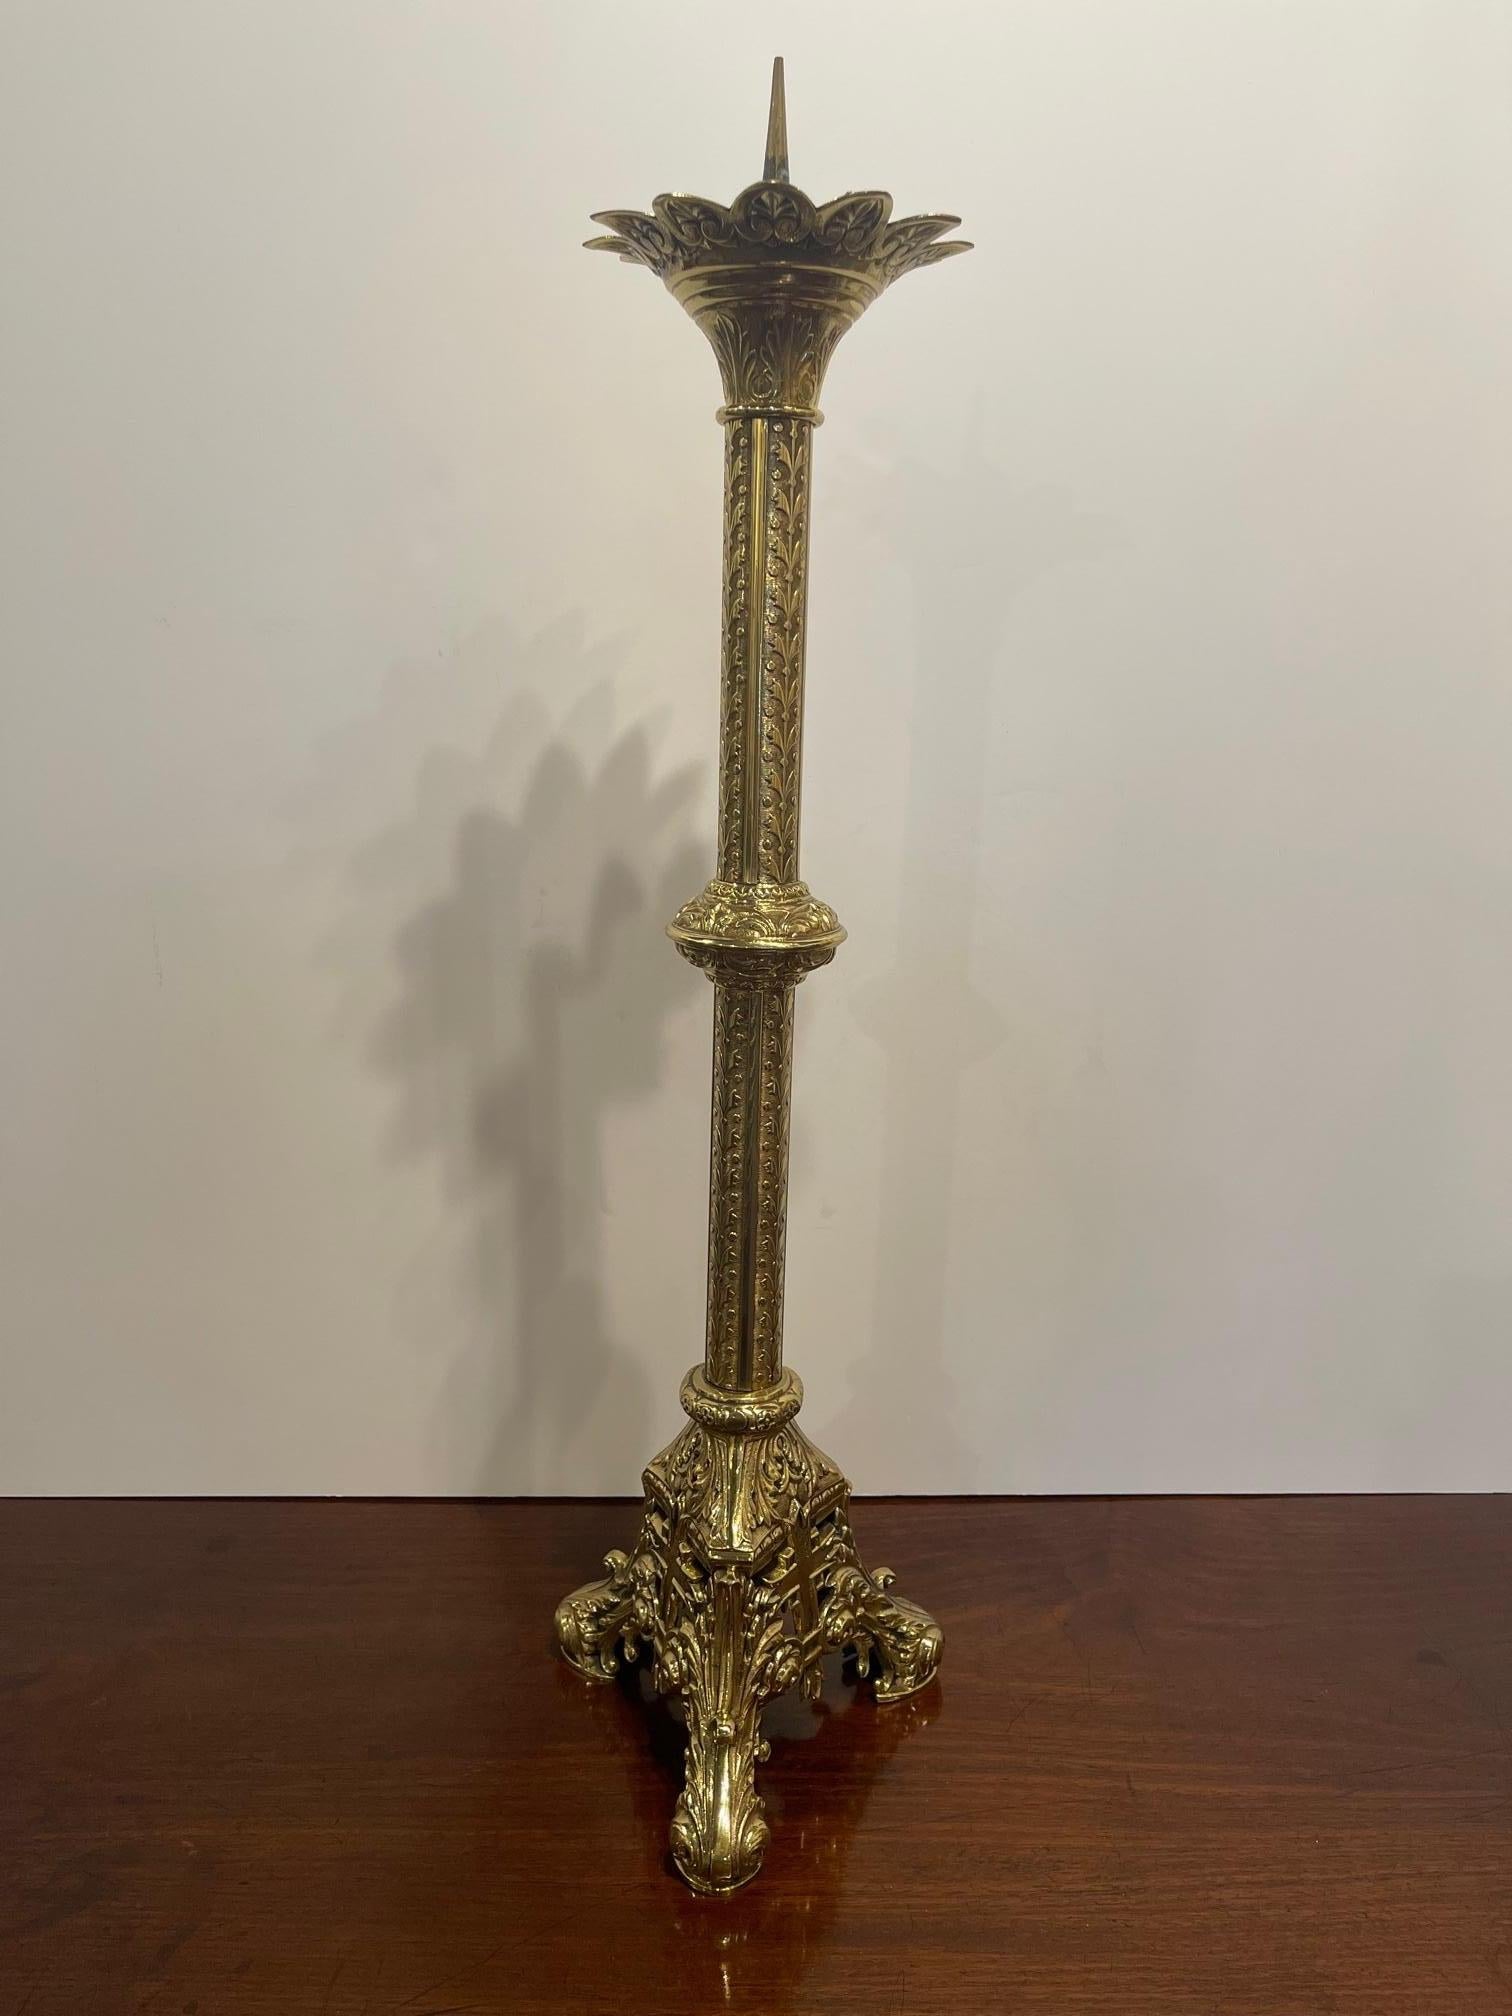 French polished brass decorative pricket or candlestick, 19th century.